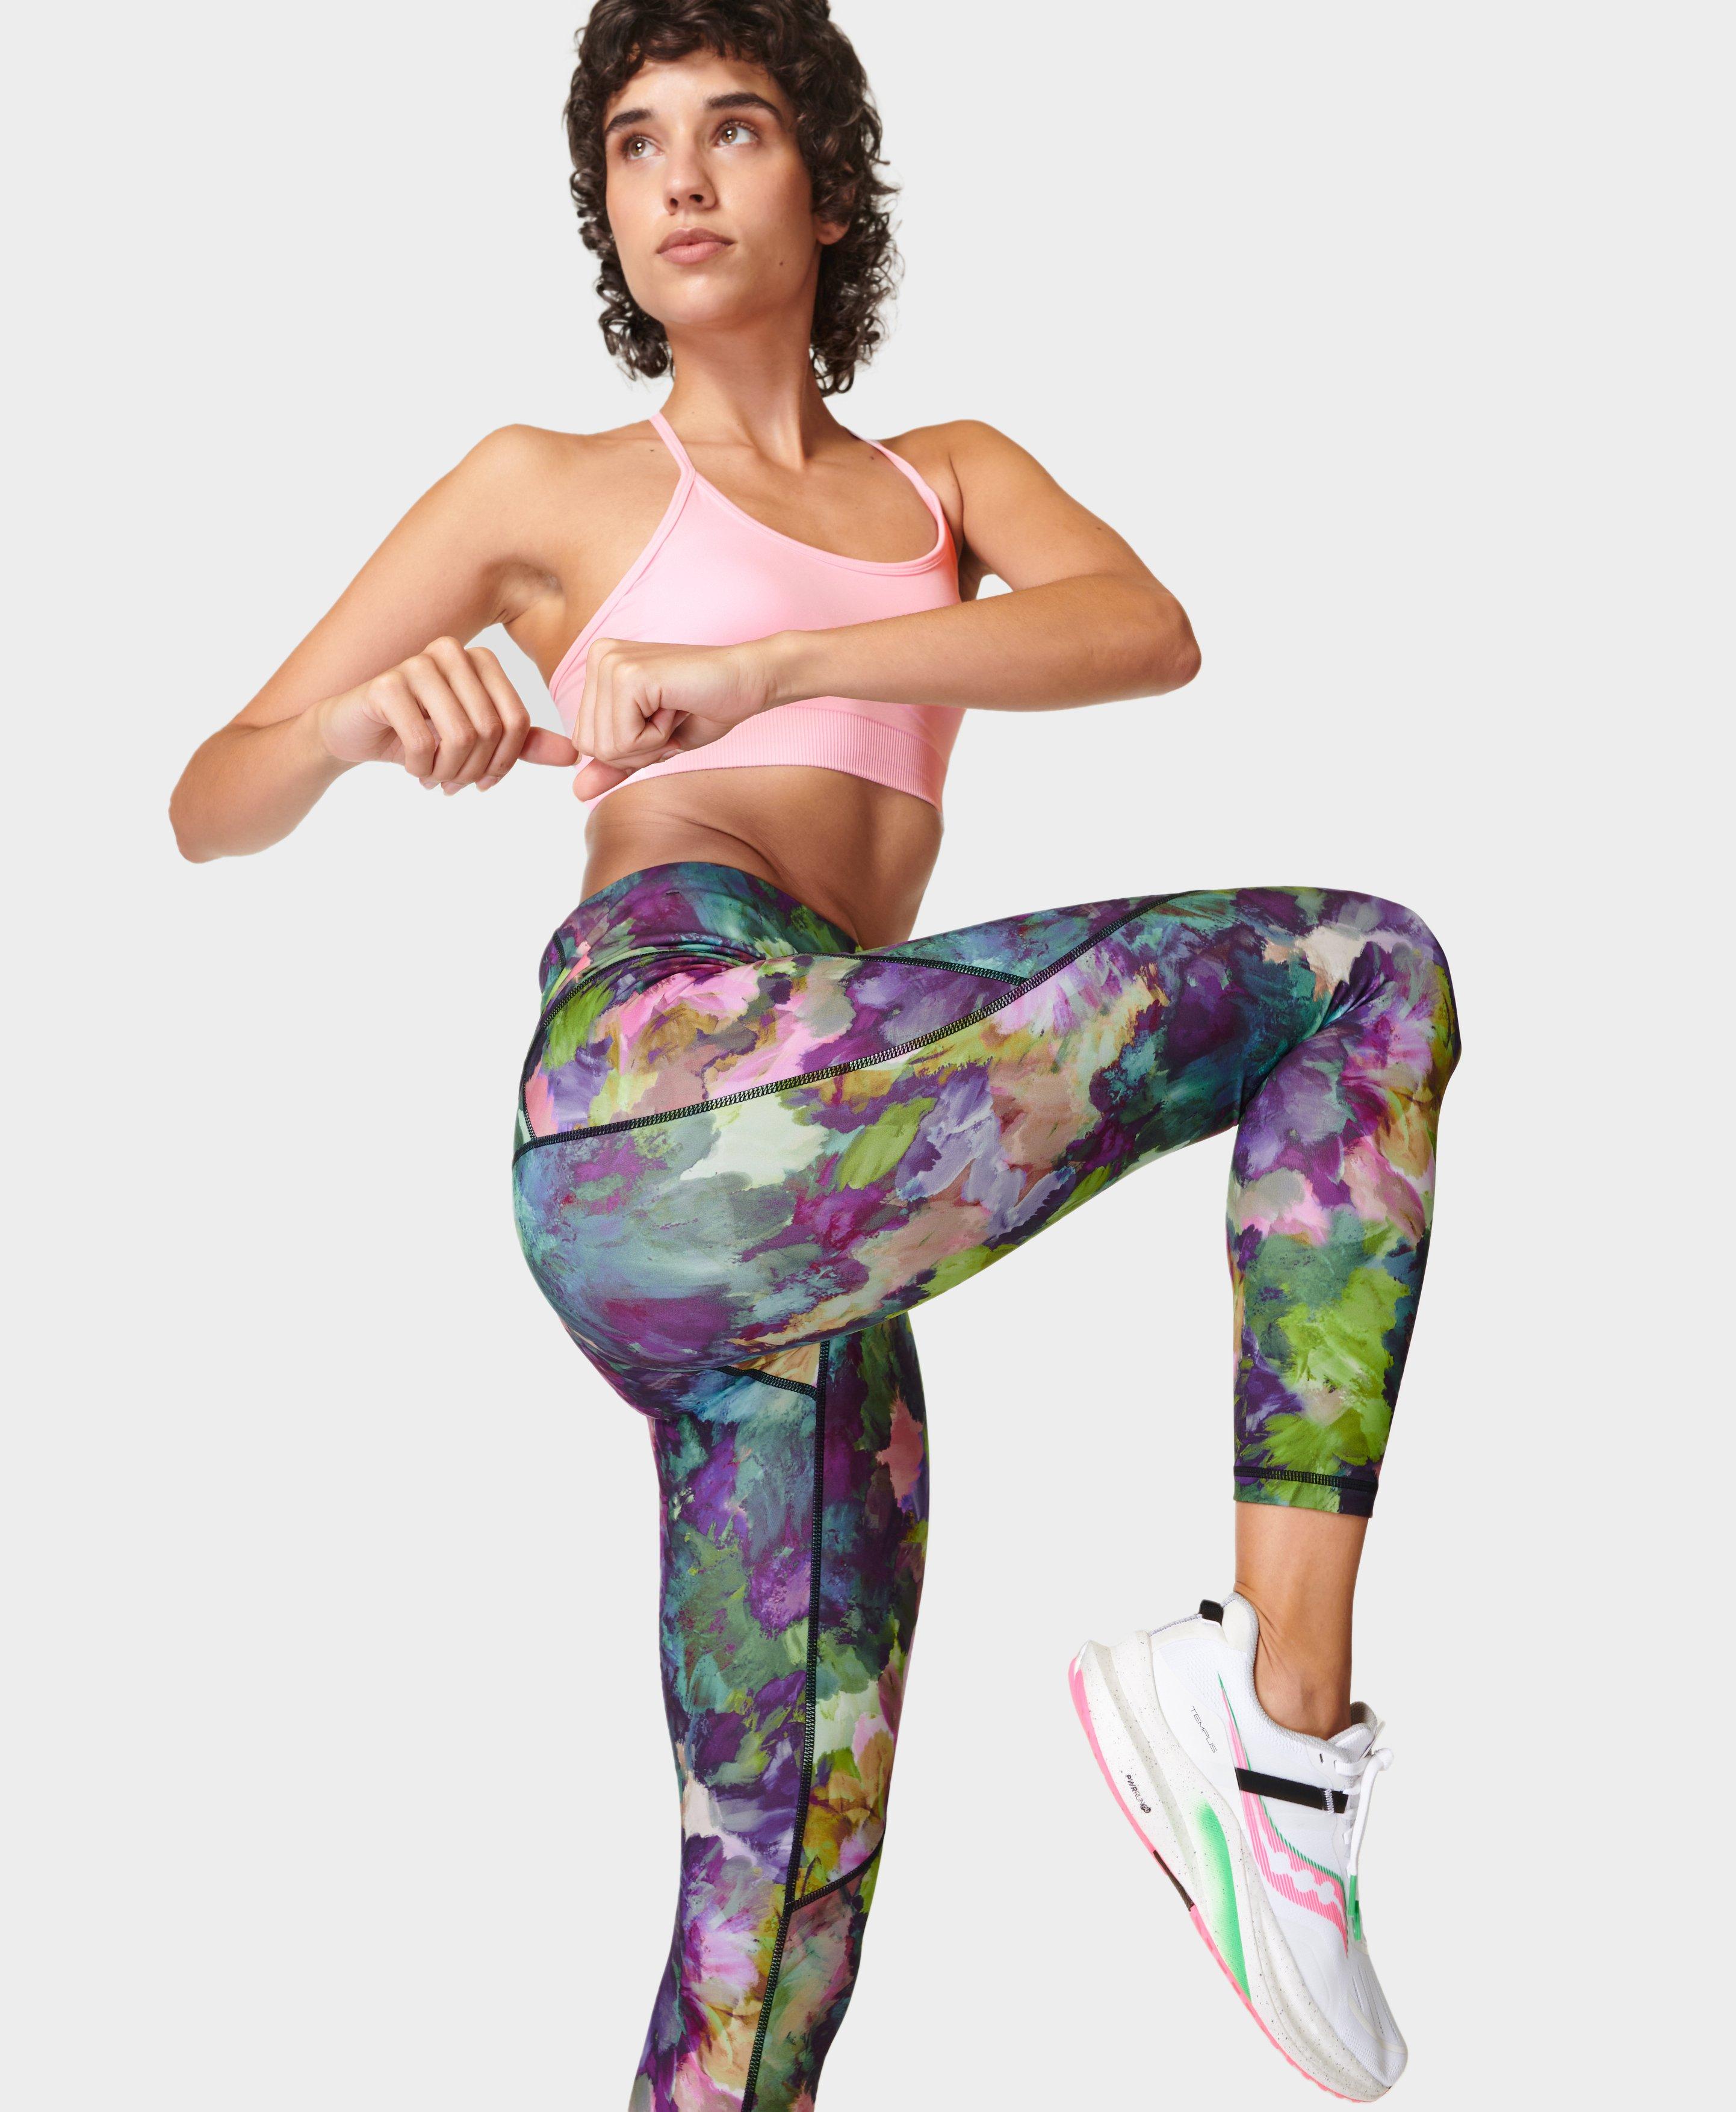 Power 7/8 Workout Leggings - Green Luxe Floral Print